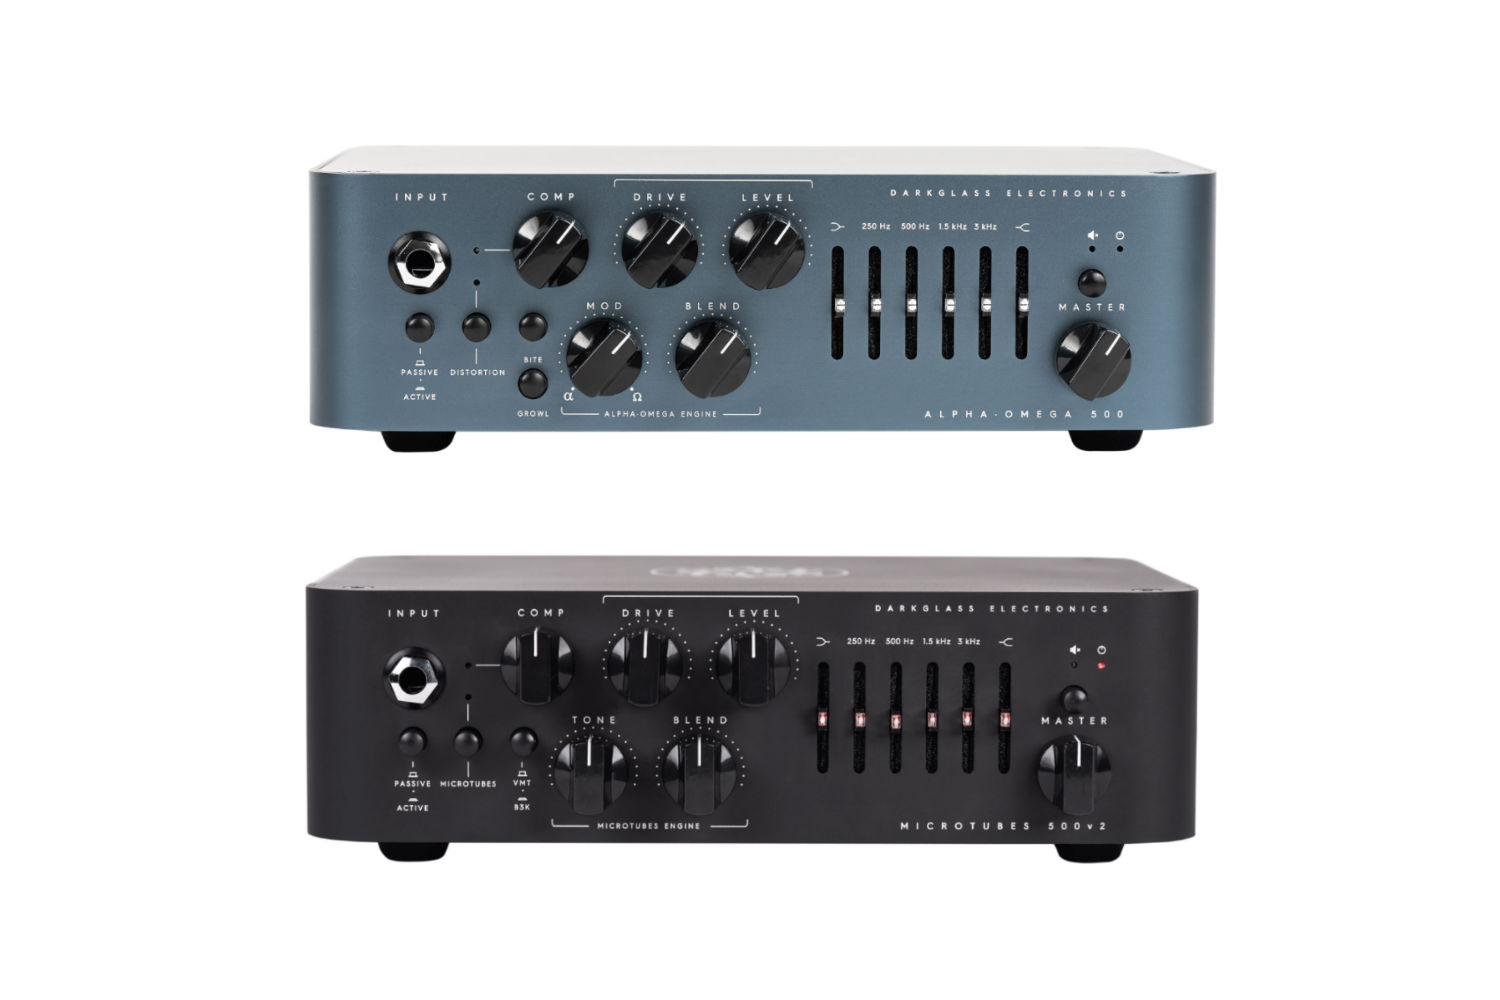 Darkglass introduces new Alpha-Omega and Microtubes v2 bass